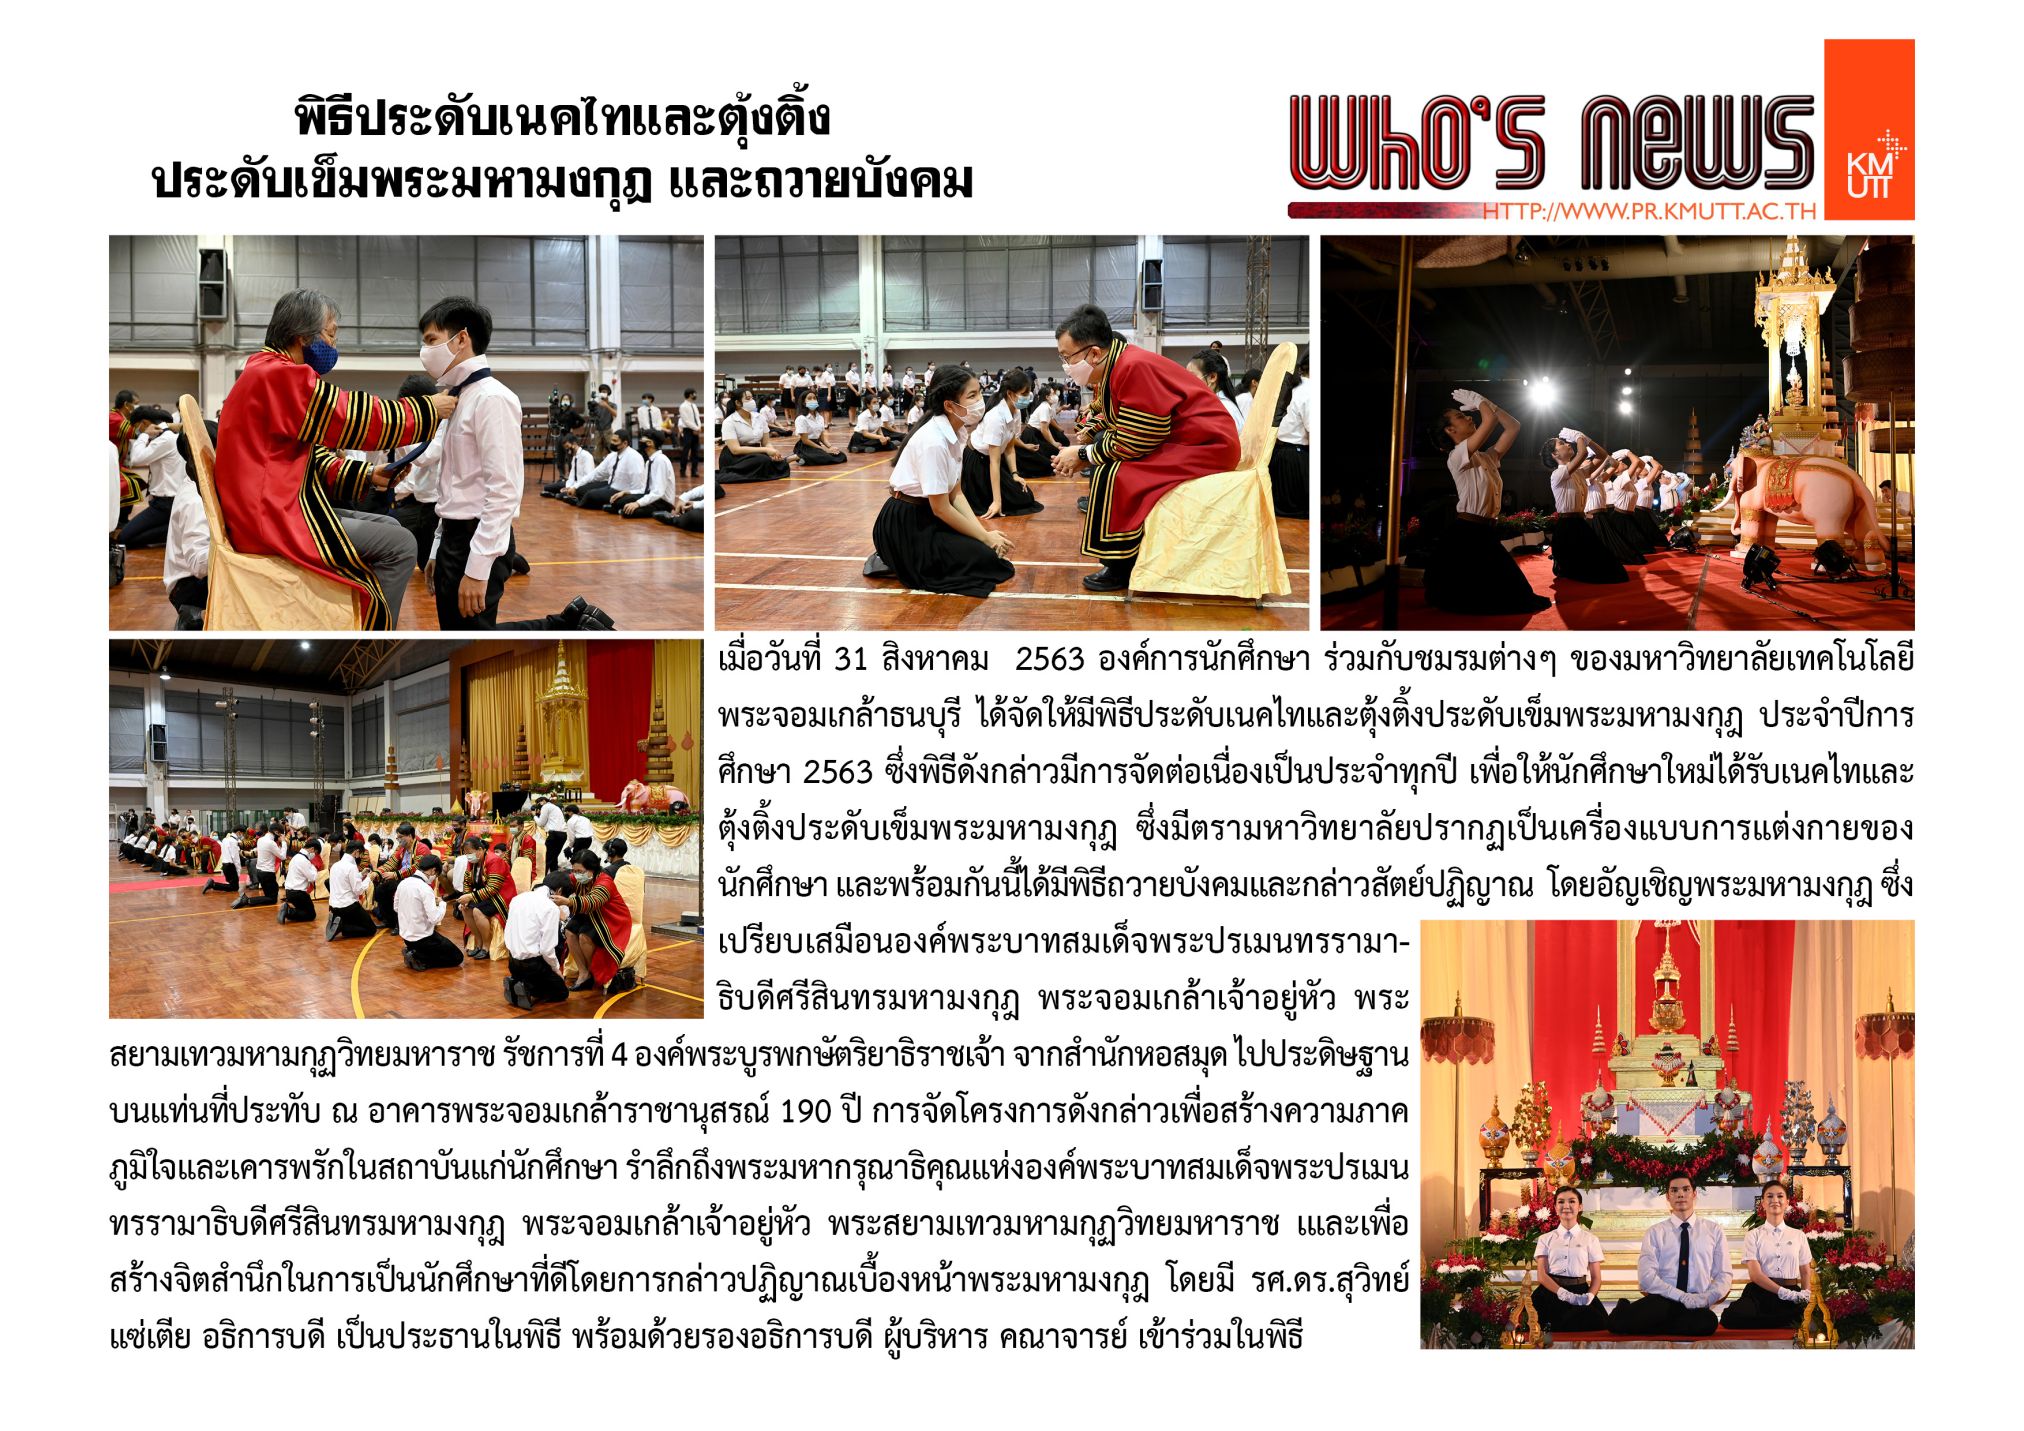 KMUTT Necktie and King Mongkut’s Pin Decoration Ceremony